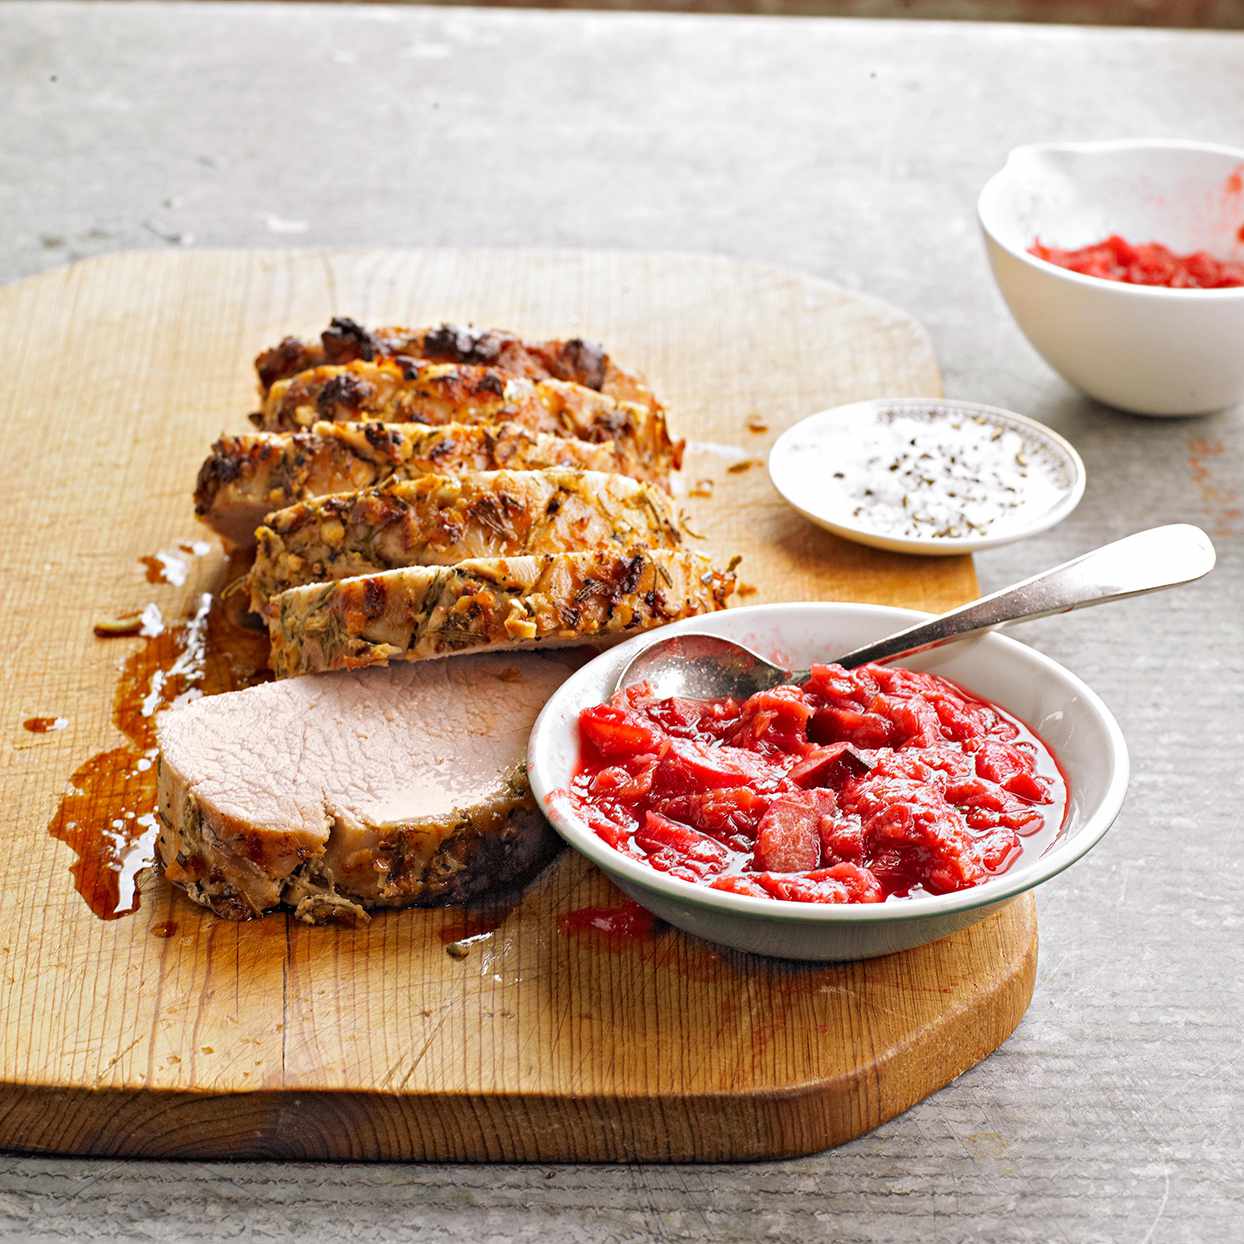 Mustard-Rubbed Pork Loin with Rhubarb Sauce